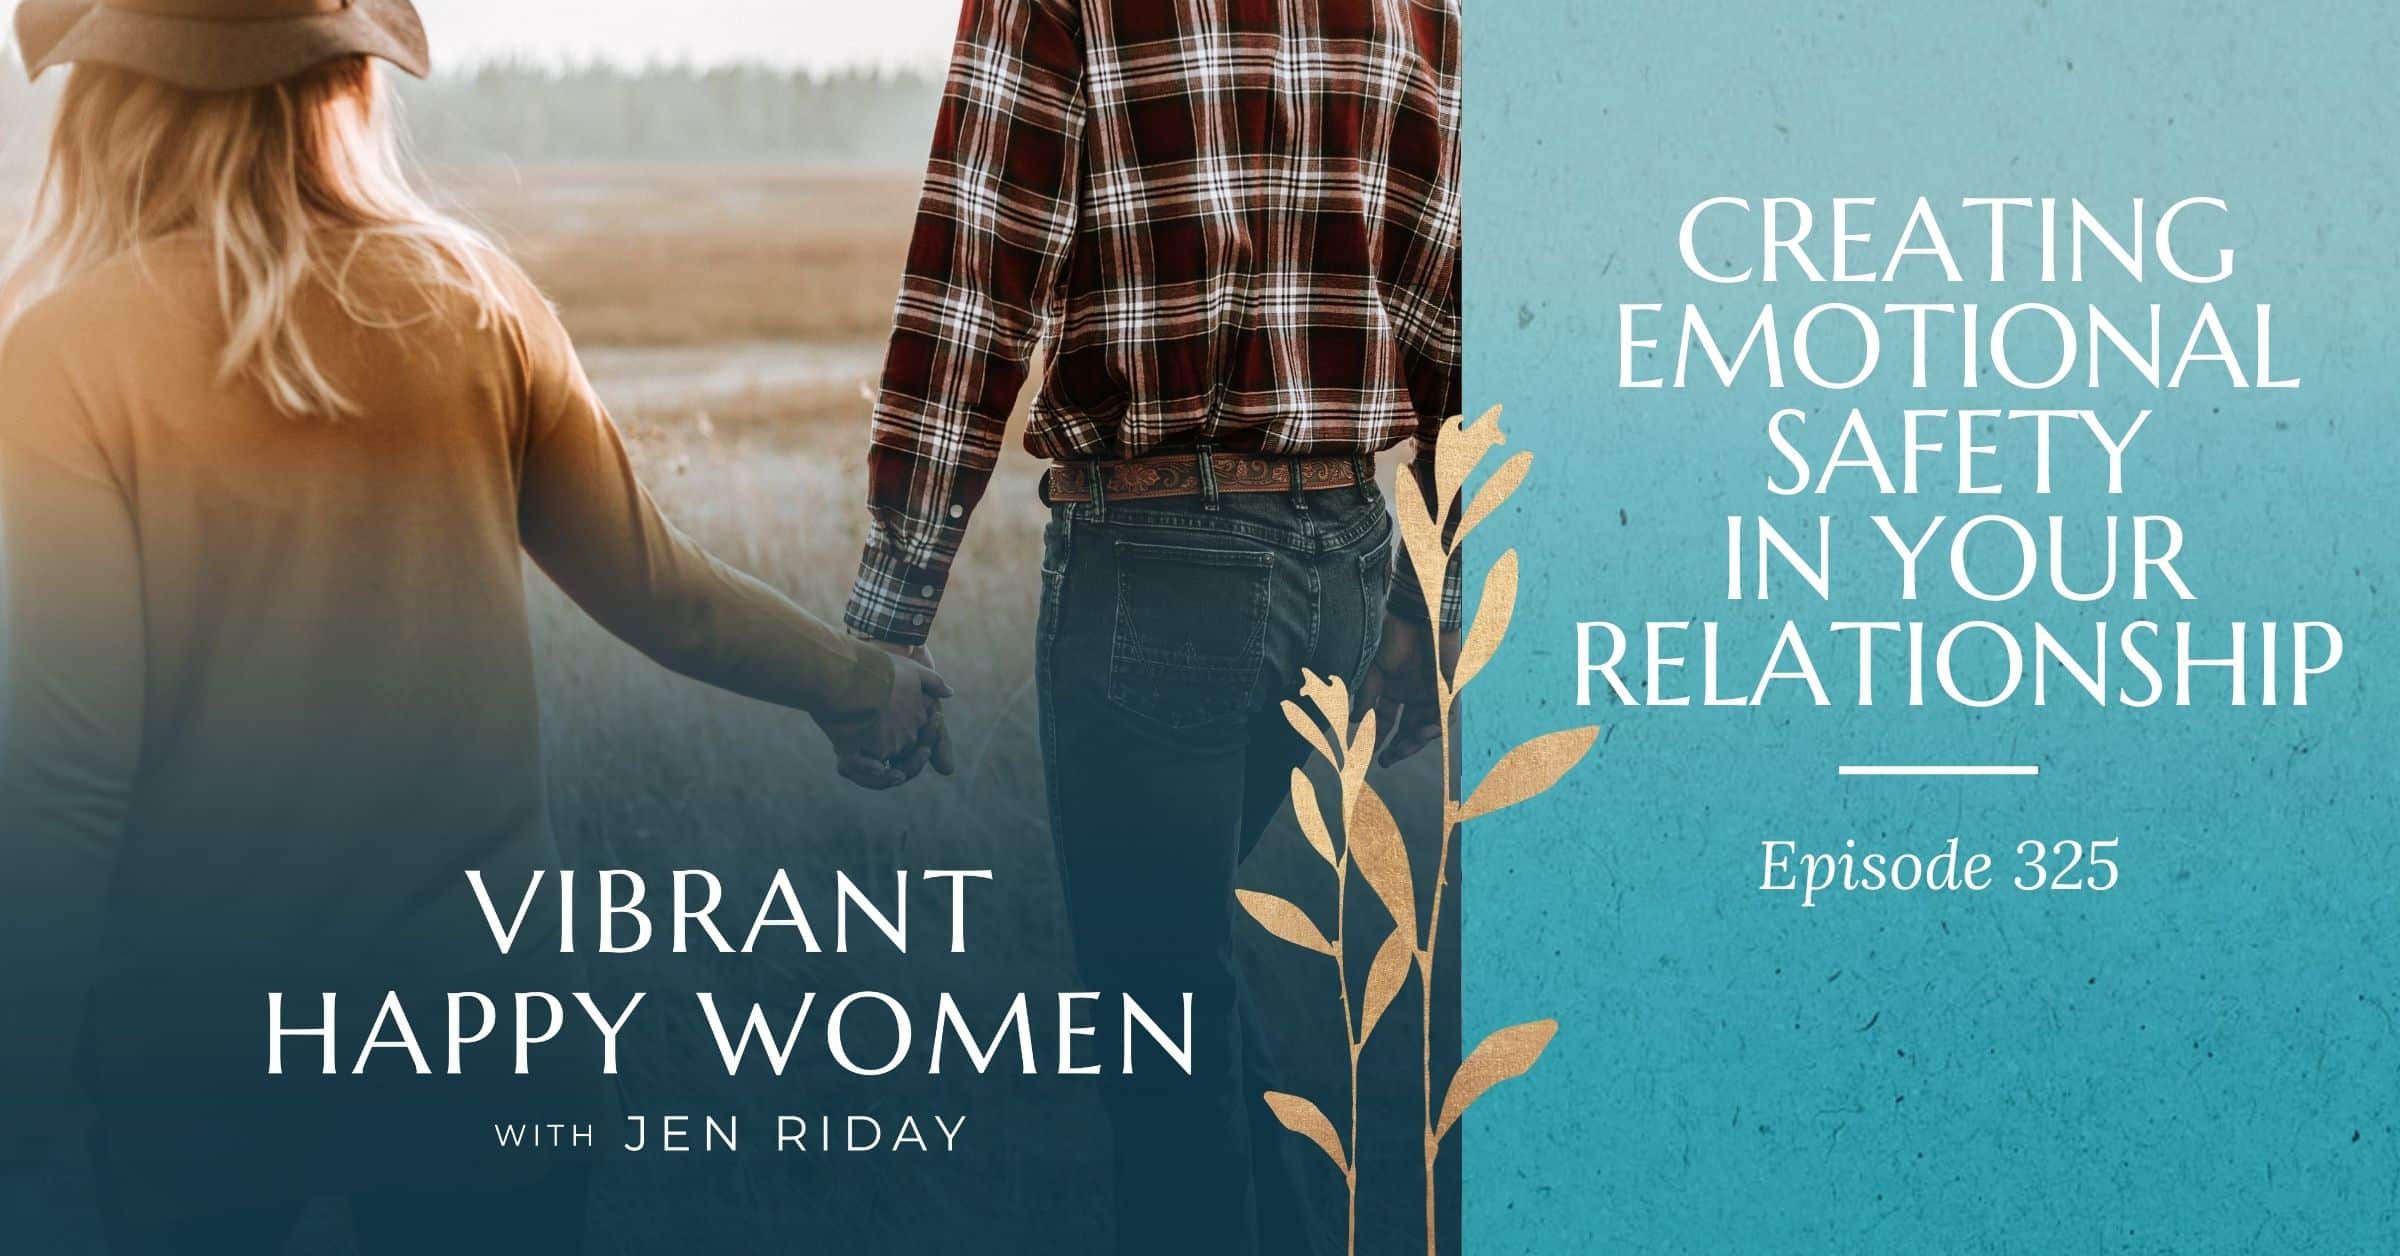 Vibrant Happy Women | Creating Emotional Safety in Your Relationship